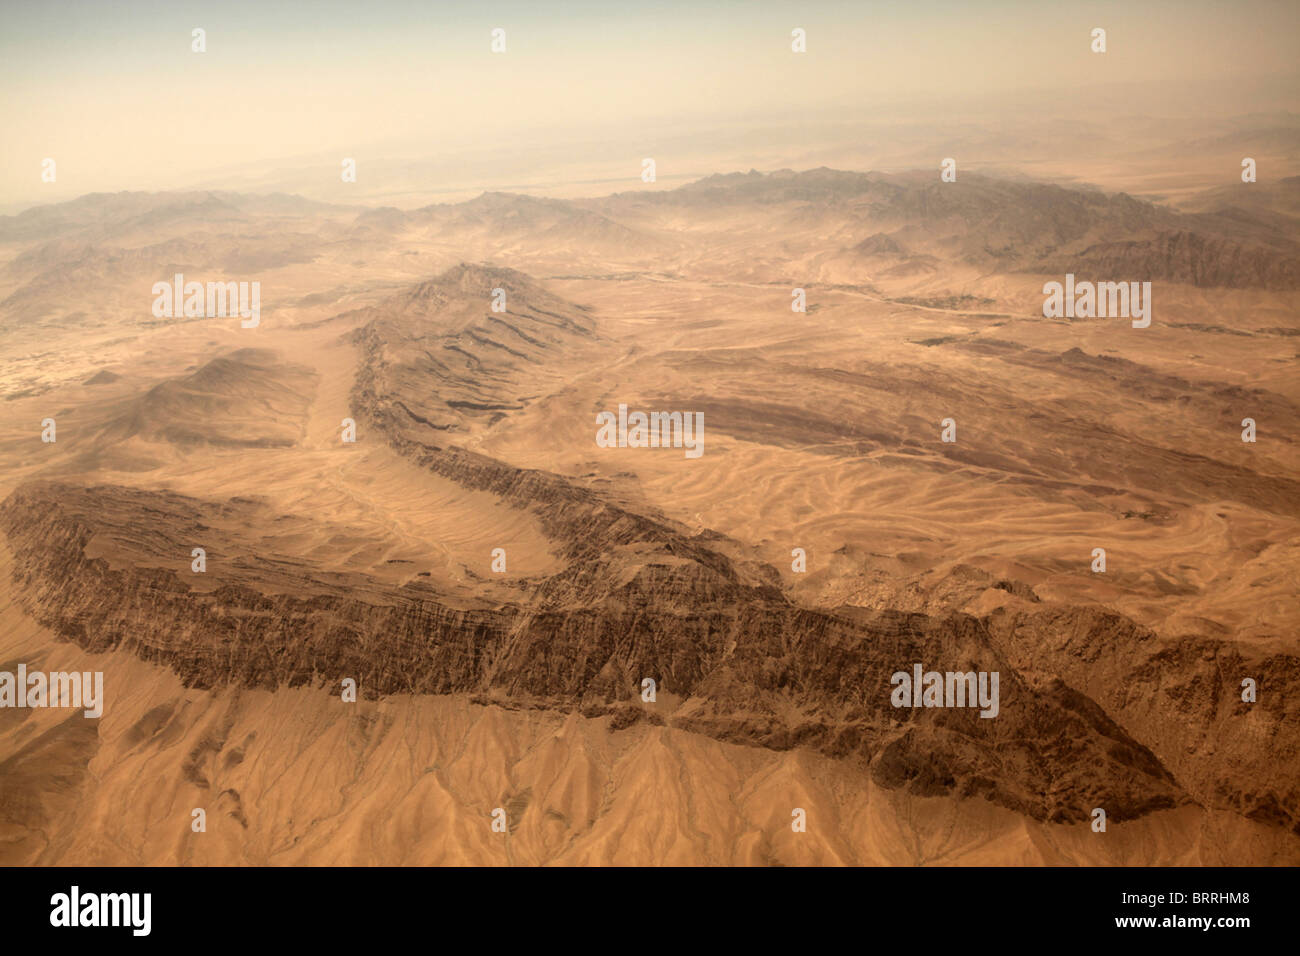 arial view of Afghanistan Stock Photo